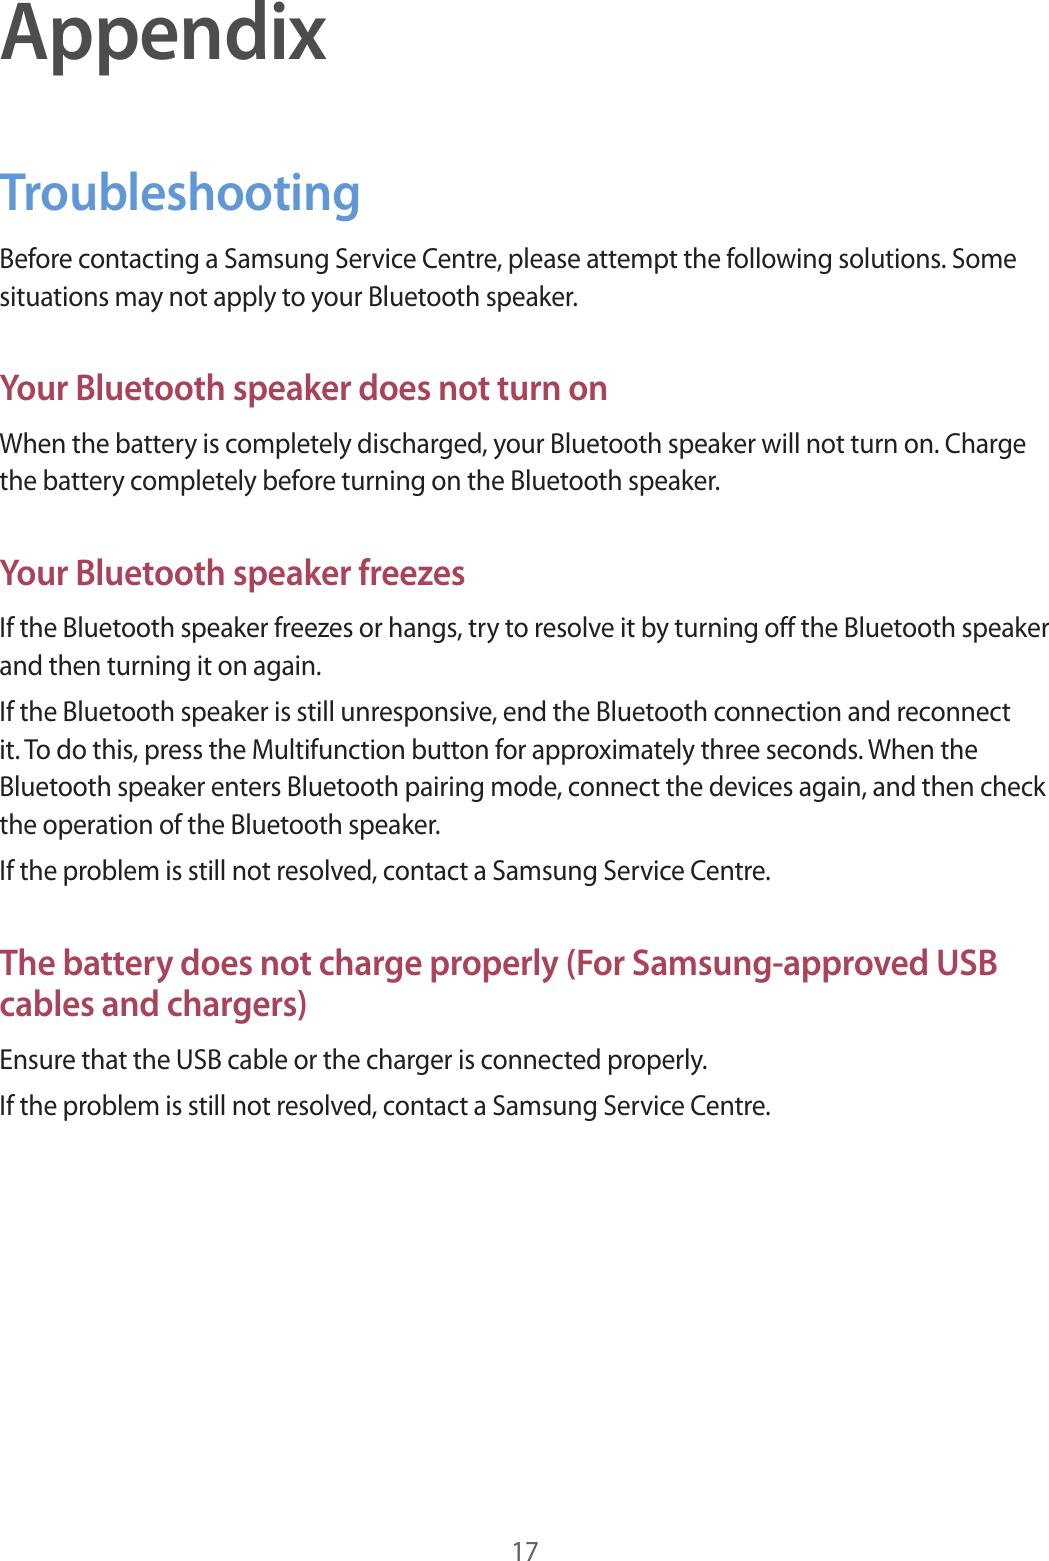 17AppendixTroubleshootingBefore contacting a Samsung Service Centre, please attempt the following solutions. Some situations may not apply to your Bluetooth speaker.Your Bluetooth speaker does not turn onWhen the battery is completely discharged, your Bluetooth speaker will not turn on. Charge the battery completely before turning on the Bluetooth speaker.Your Bluetooth speaker freezesIf the Bluetooth speaker freezes or hangs, try to resolve it by turning off the Bluetooth speaker and then turning it on again.If the Bluetooth speaker is still unresponsive, end the Bluetooth connection and reconnect it. To do this, press the Multifunction button for approximately three seconds. When the Bluetooth speaker enters Bluetooth pairing mode, connect the devices again, and then check the operation of the Bluetooth speaker.If the problem is still not resolved, contact a Samsung Service Centre.The battery does not charge properly (For Samsung-approved USB cables and chargers)Ensure that the USB cable or the charger is connected properly.If the problem is still not resolved, contact a Samsung Service Centre.